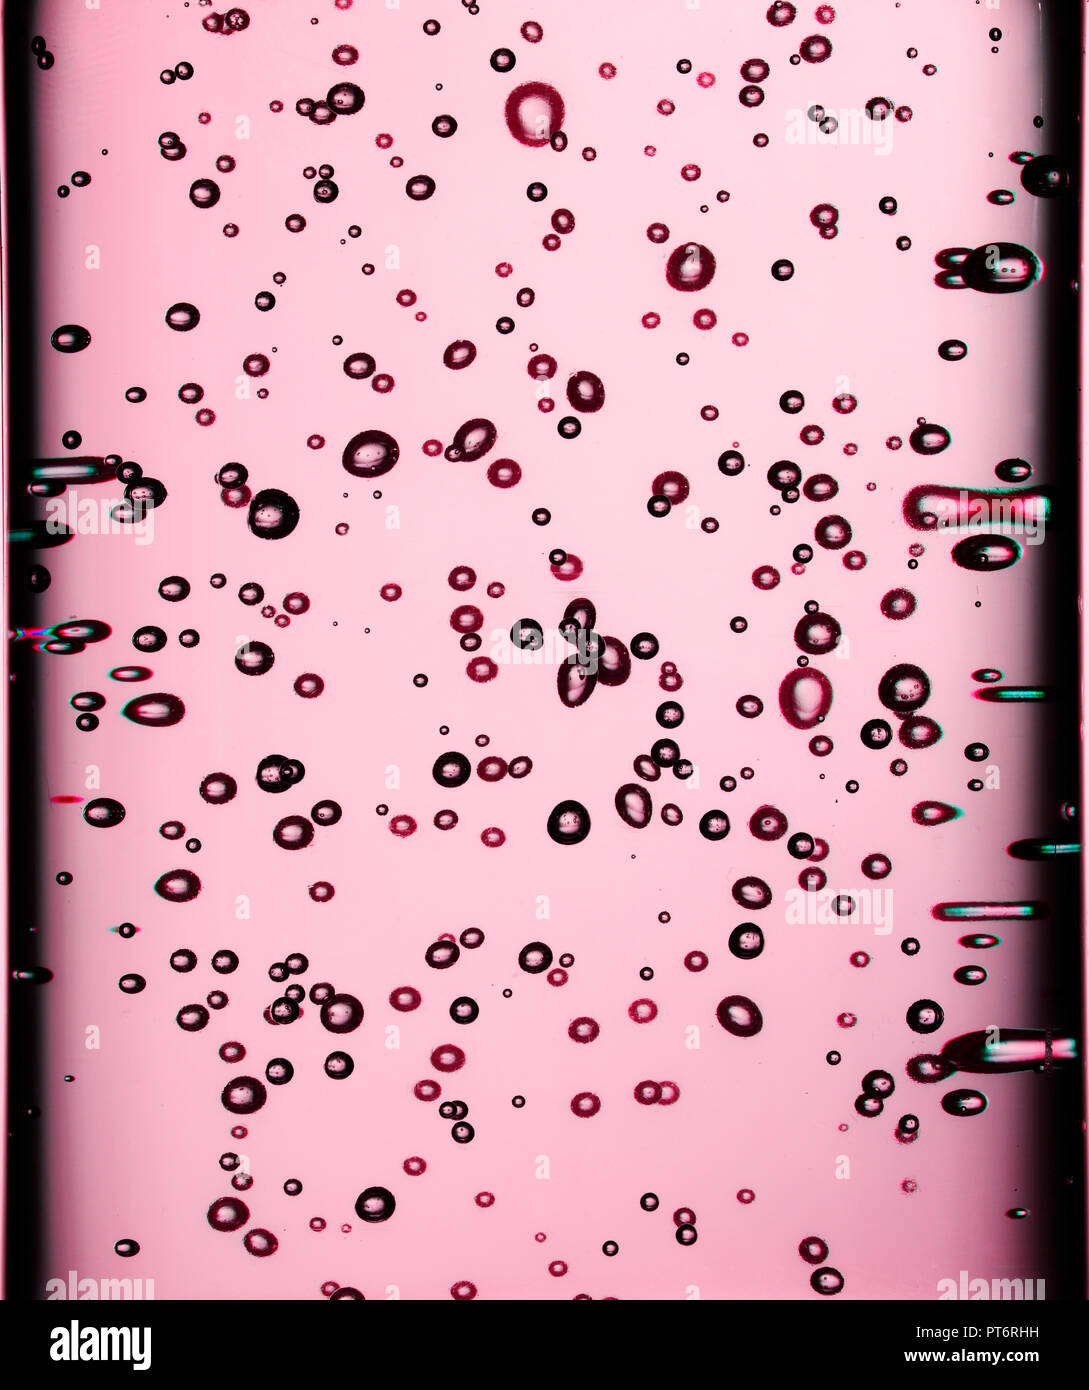 Pink Rose Bubbles Floating in Liquid, Texture, Cosmetics Stock Photo